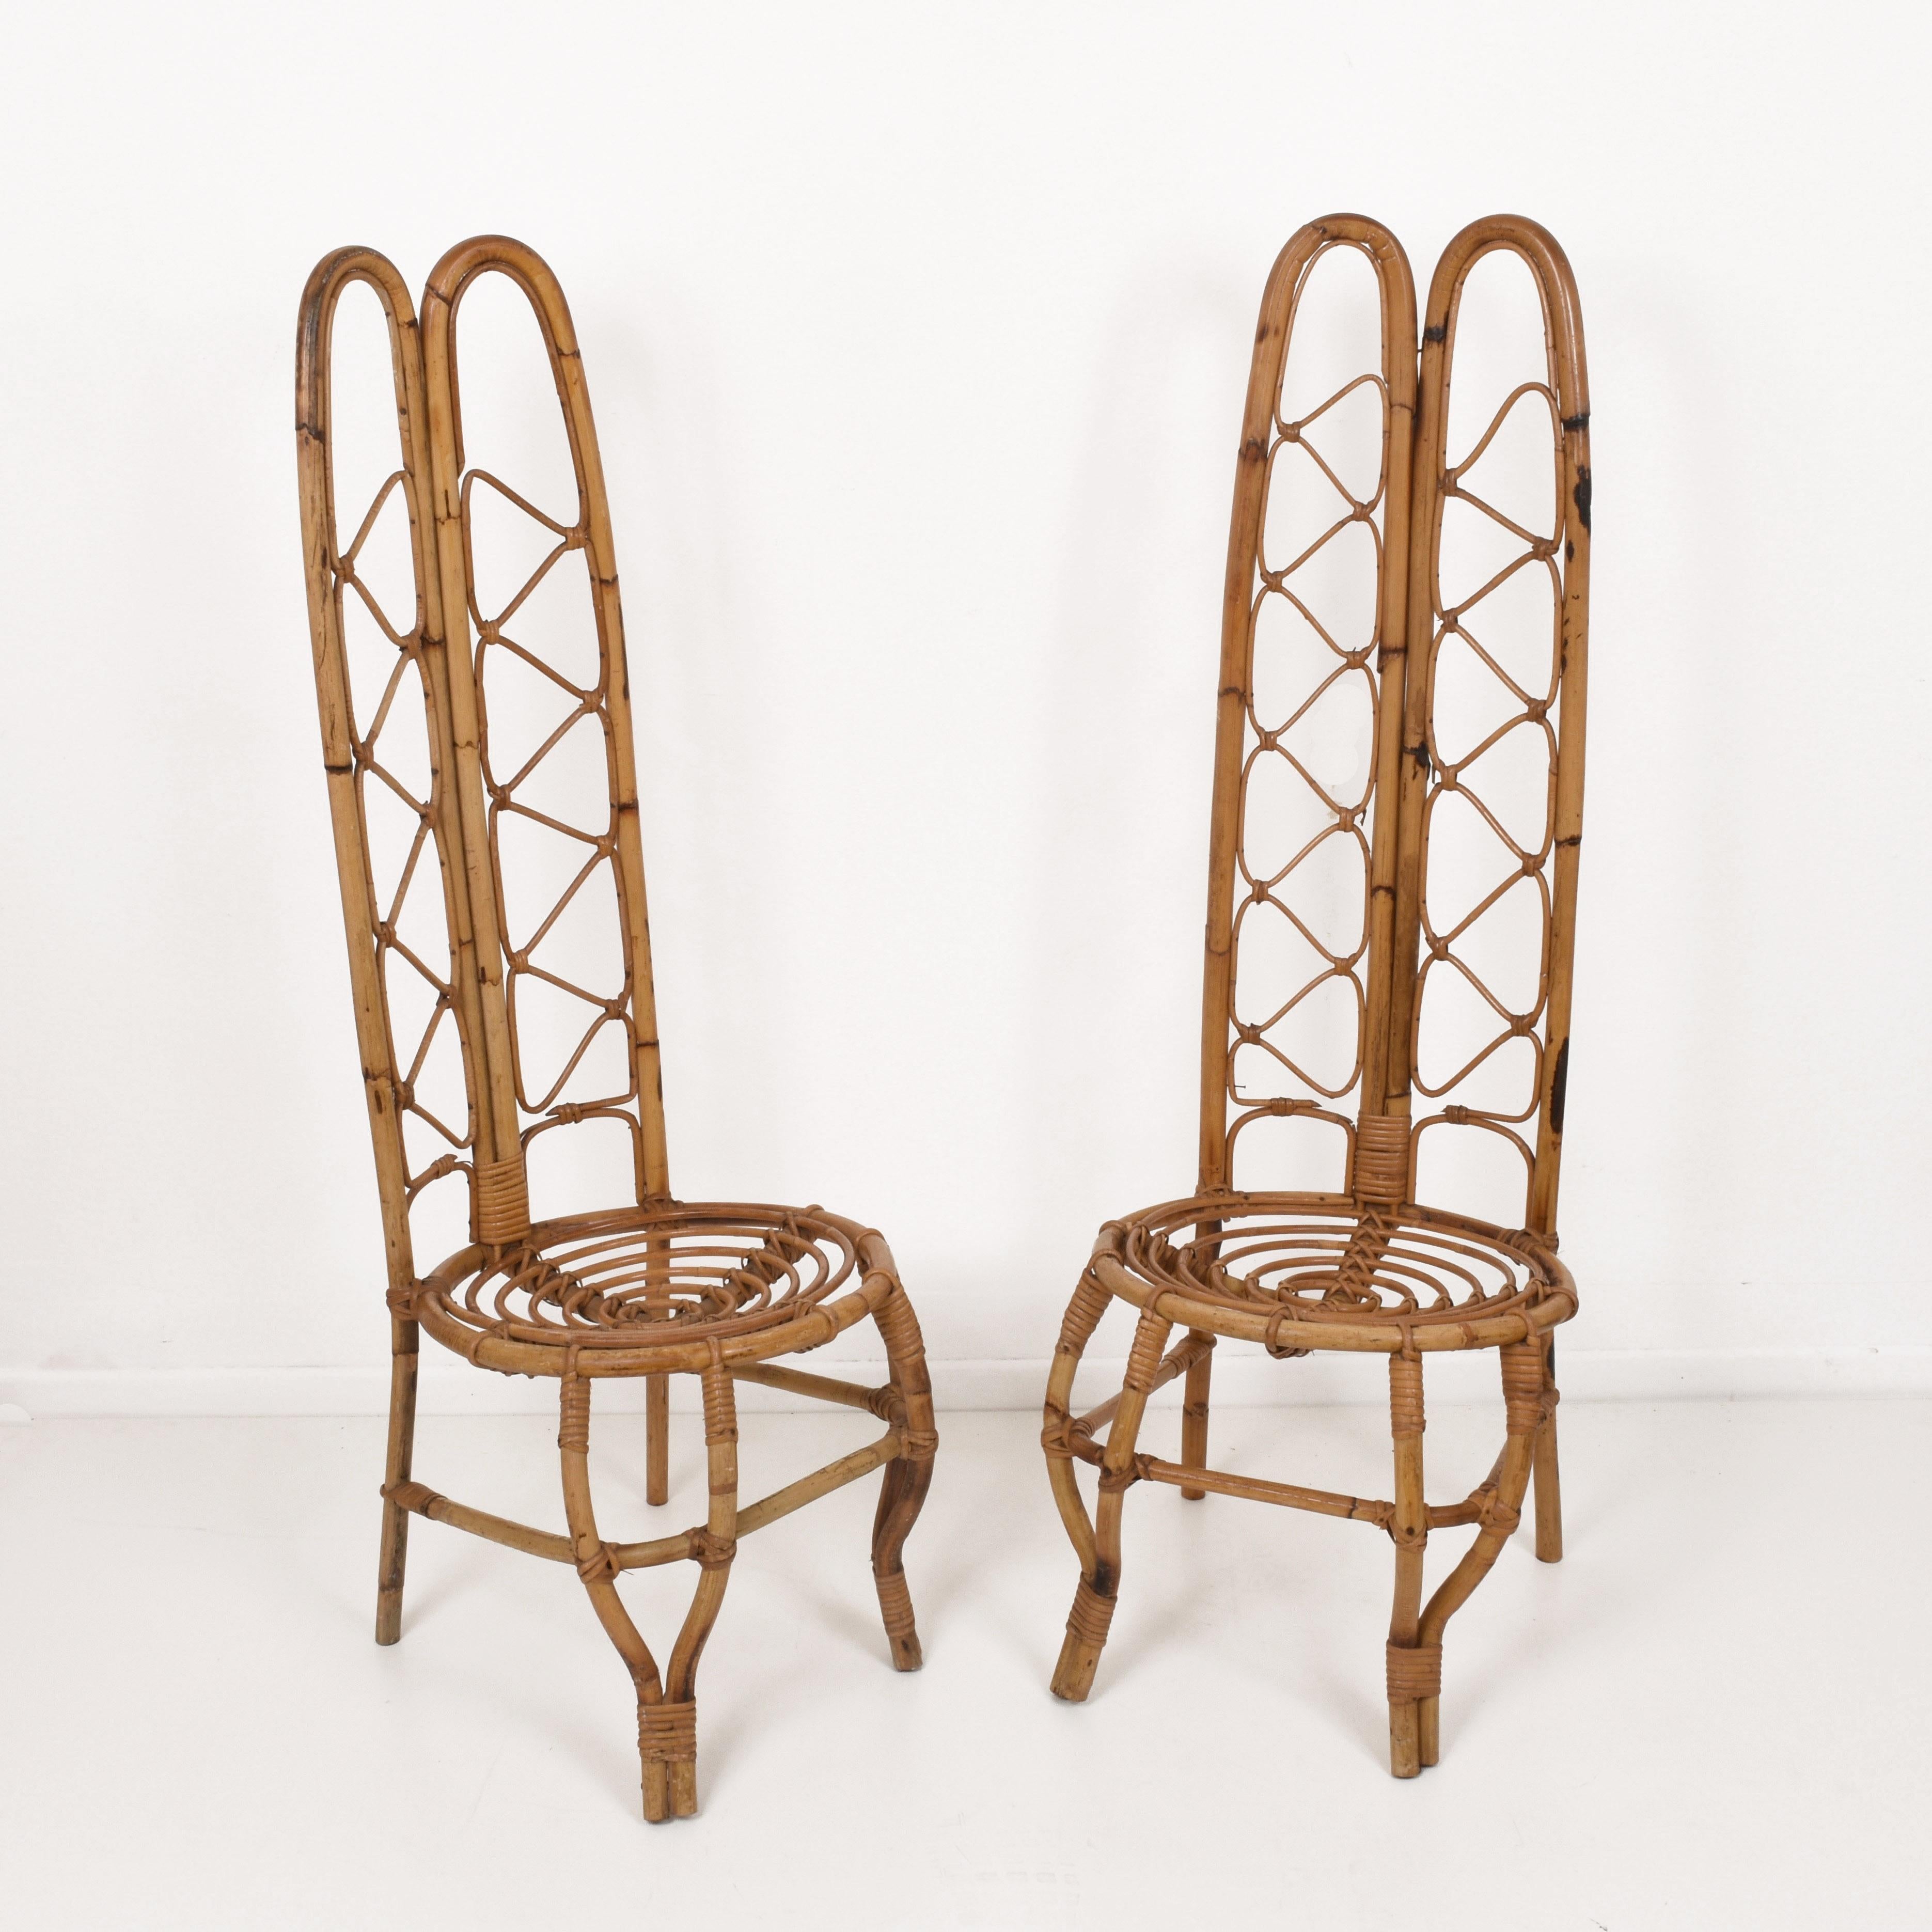 These rattan and bamboo chairs produced in France, in the 1960s.